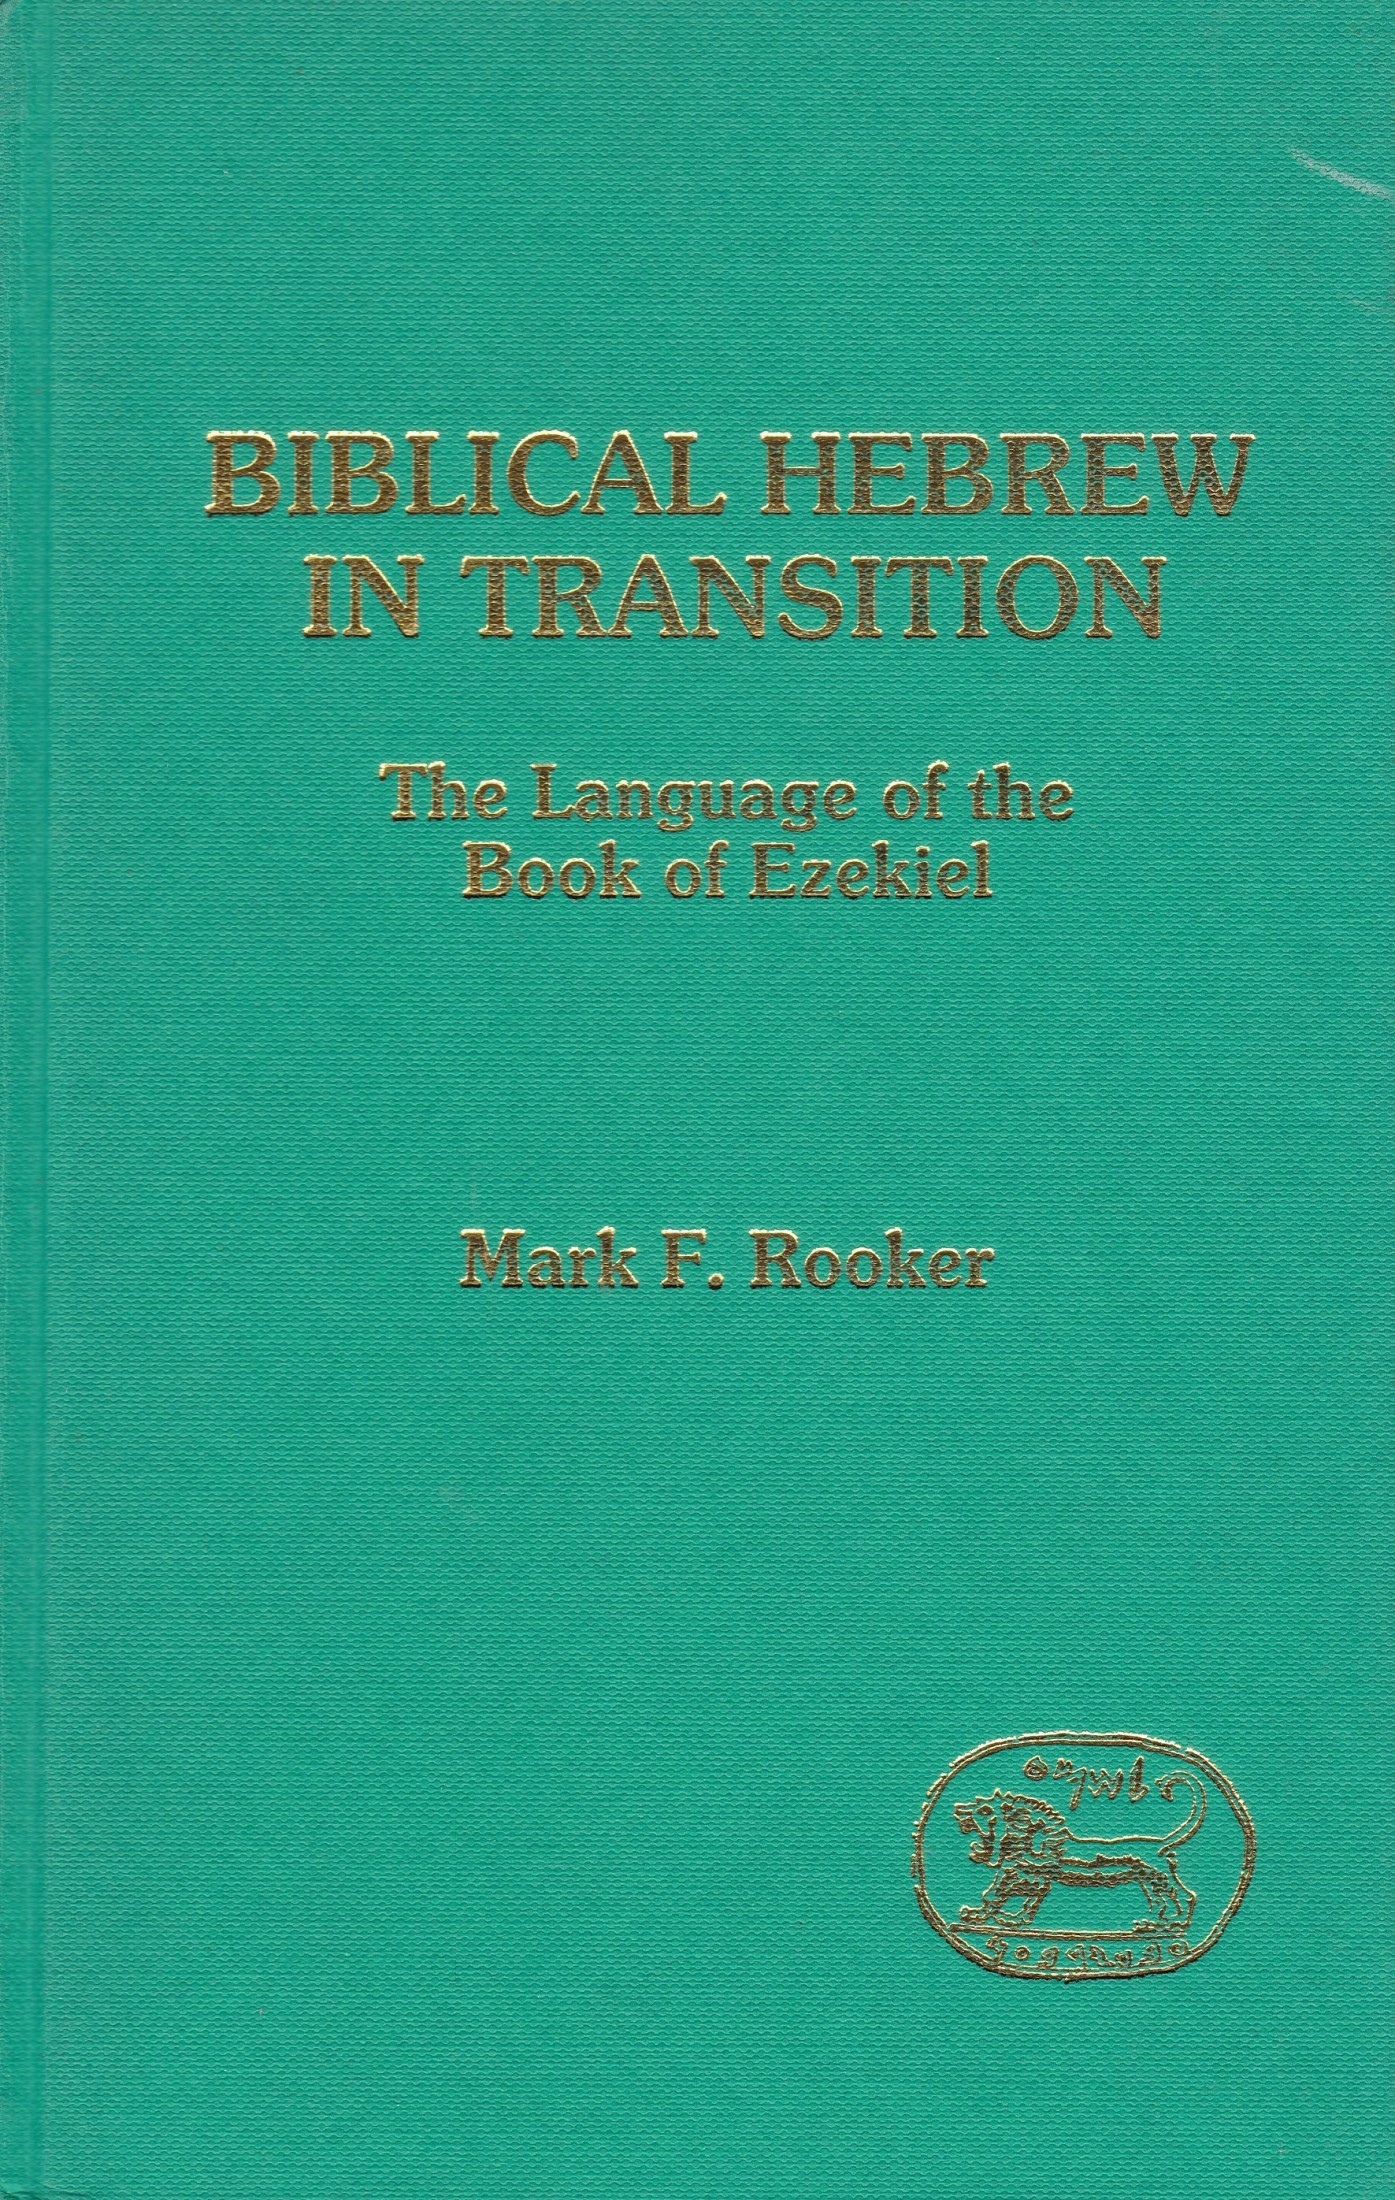 Biblical Hebrew in Transition: The Language of the Book of Ezekiel